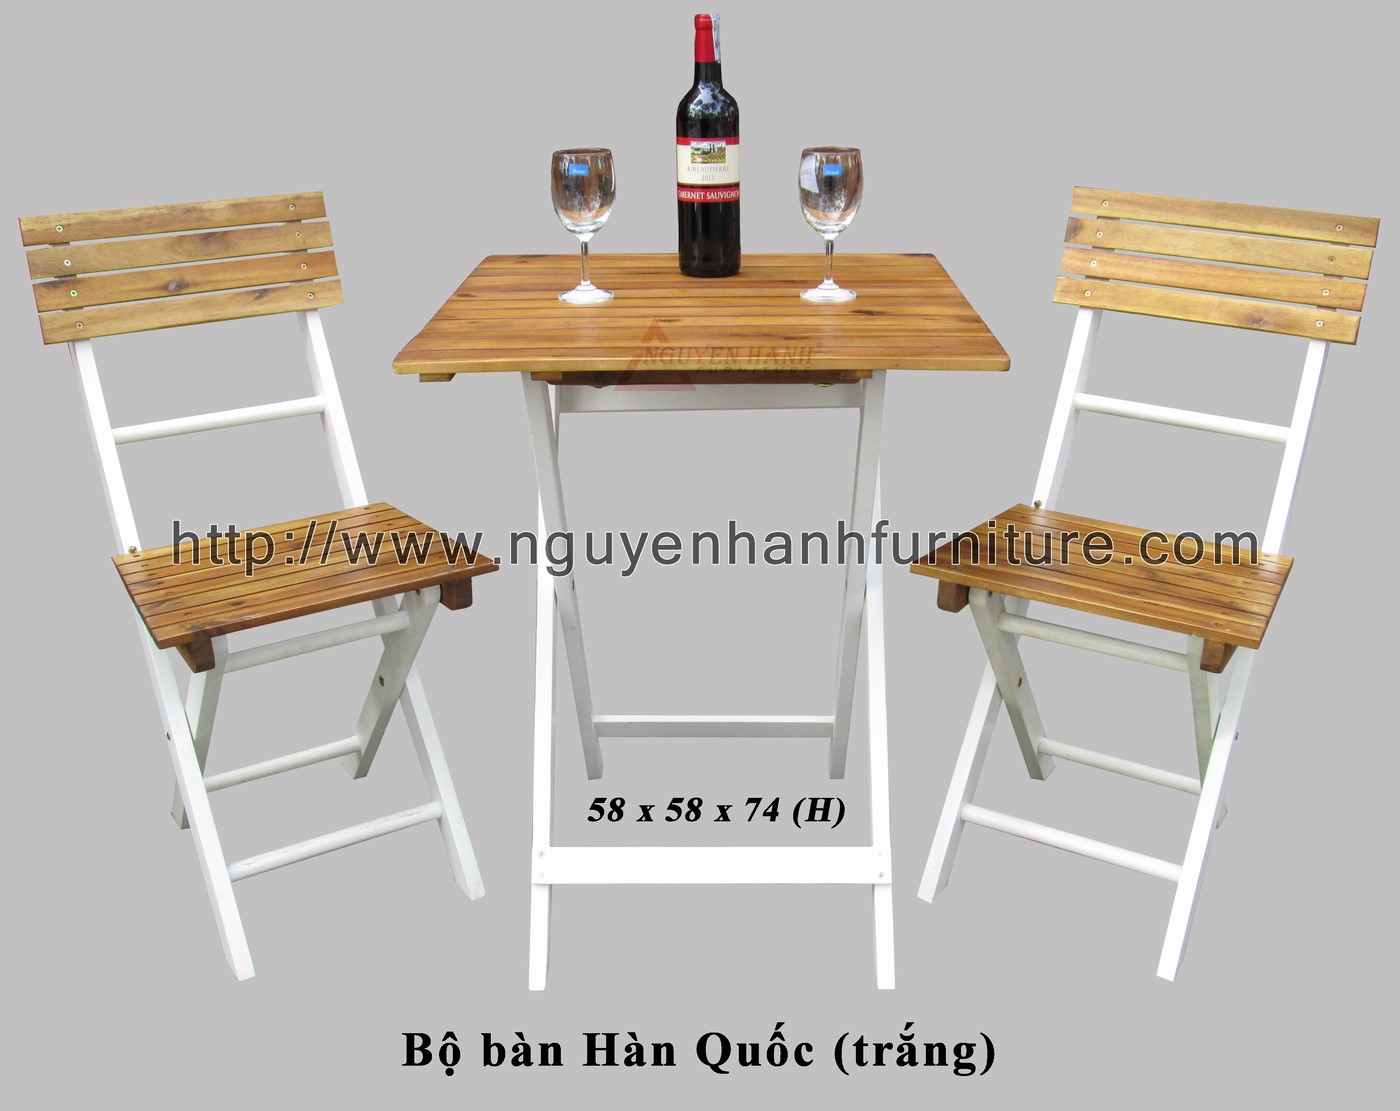 Name product:  - Dimensions: 58 x 58 x 74 (H) - Description: Red oil wood